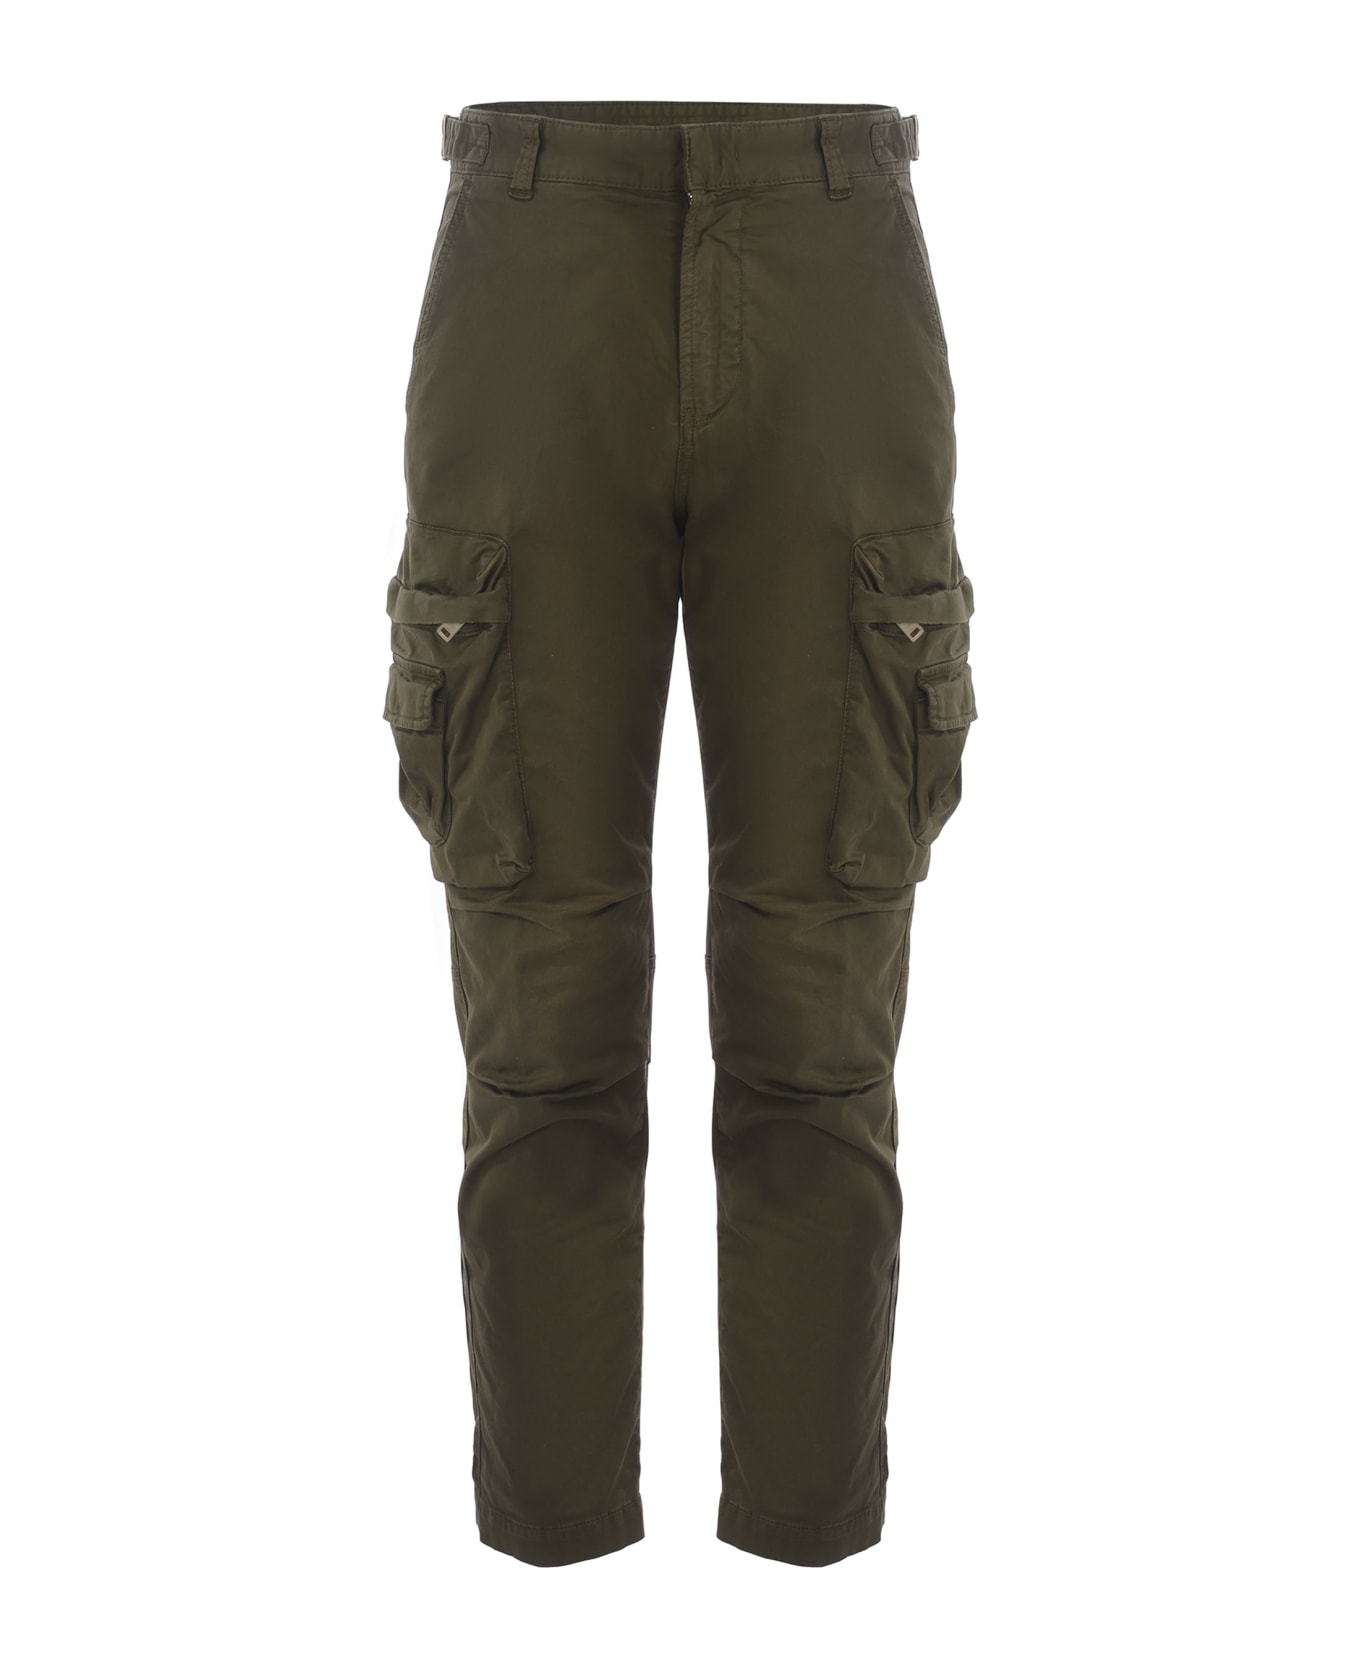 Diesel P-argym-new-a Faded Cargo Pants - Af Green